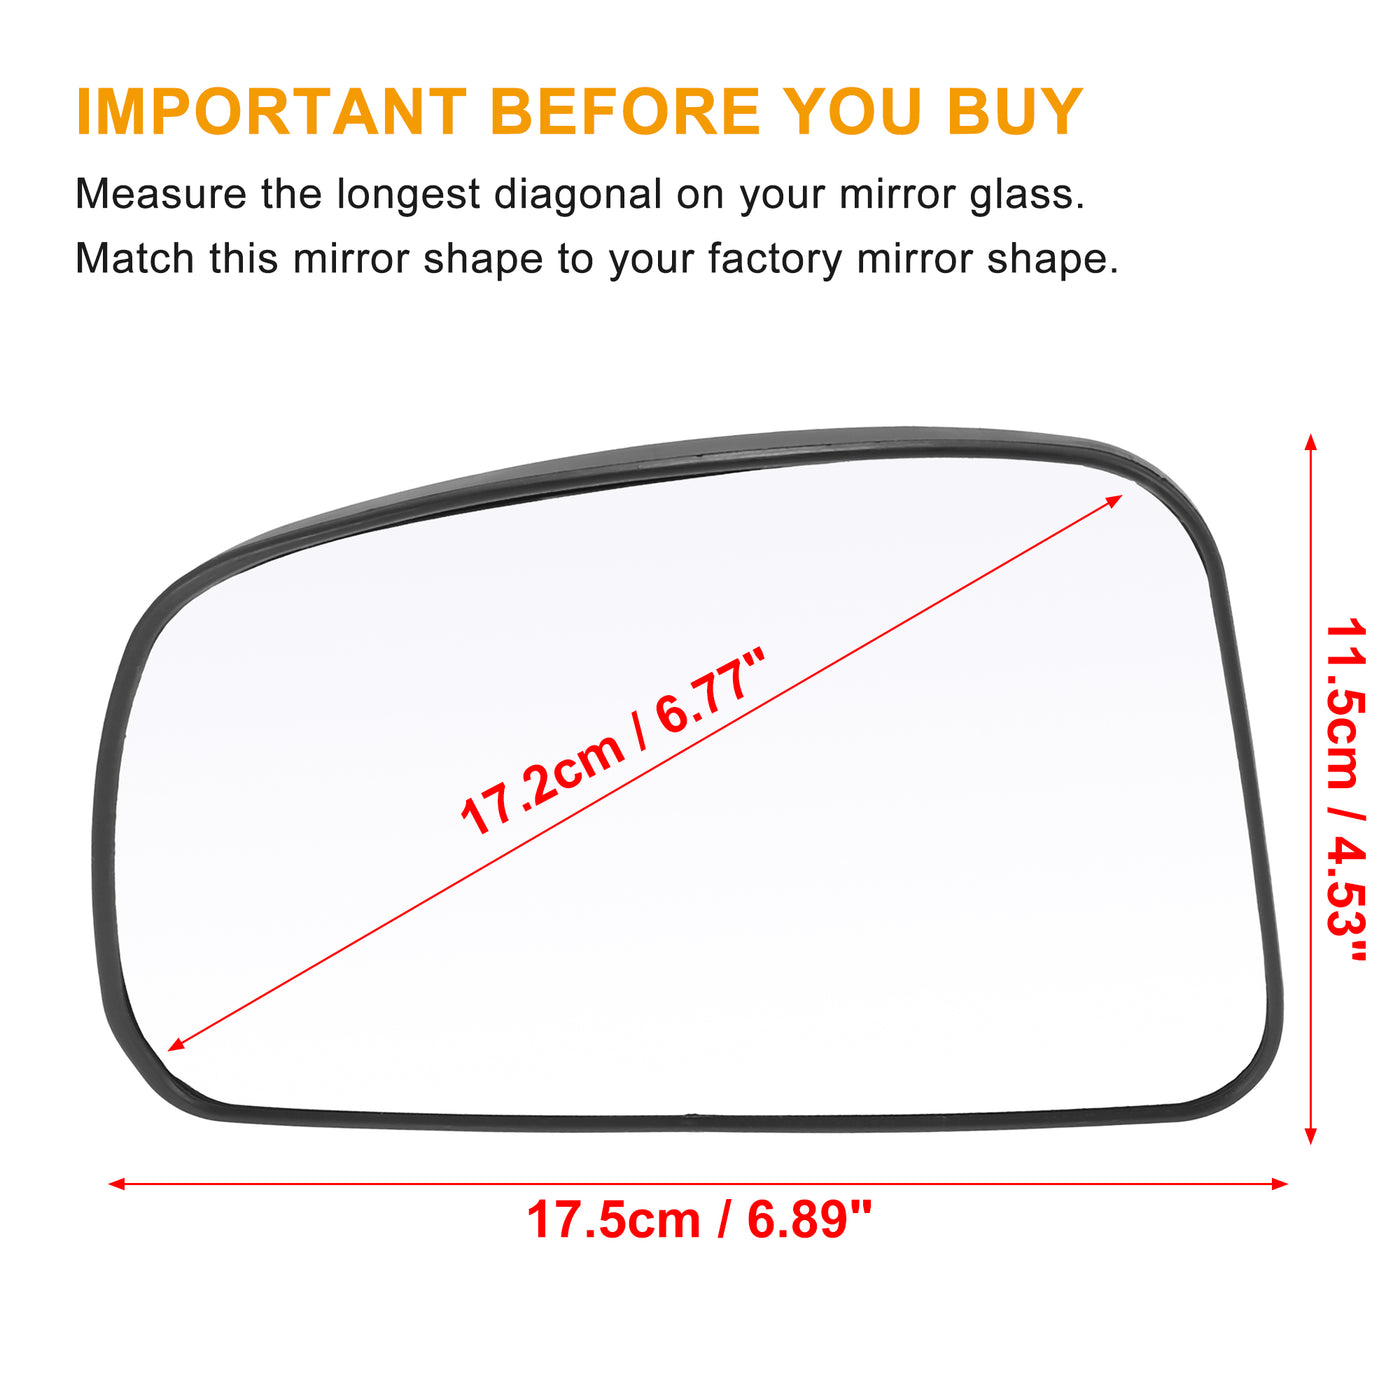 X AUTOHAUX Car Rearview Left Driver Side Heated Mirror Glass Replacement with Backing Plate for Nissan Tiida 2007-2012